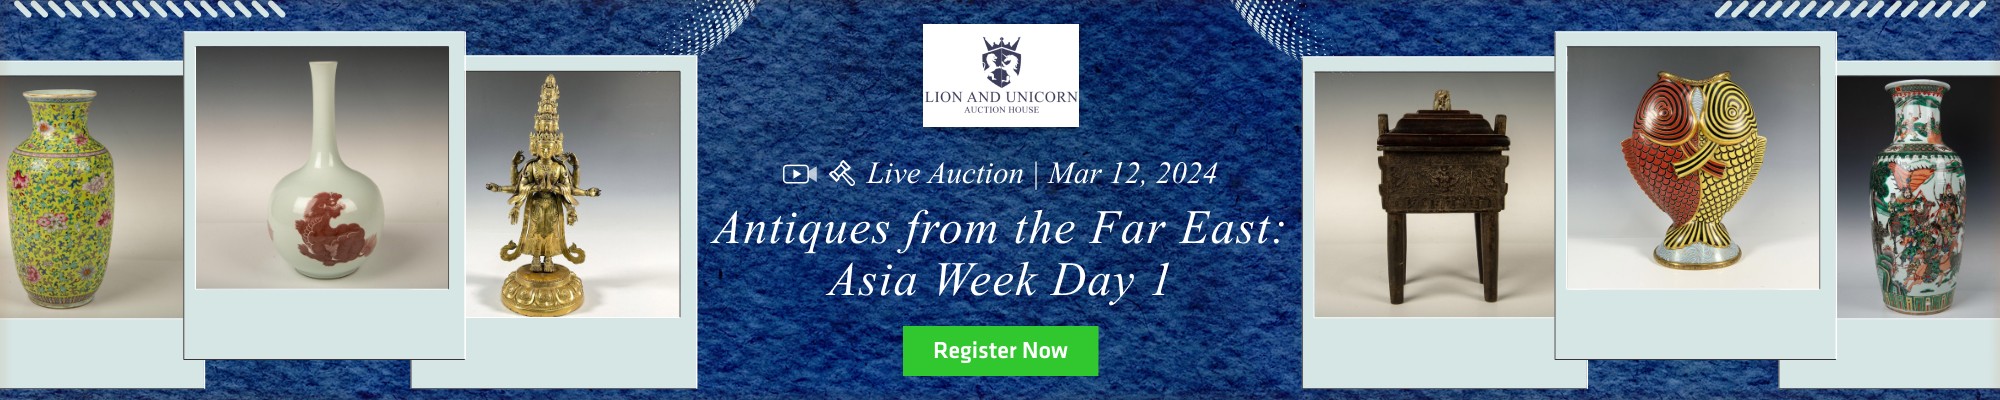 Antiques from the Far East: Asia Week Day 1